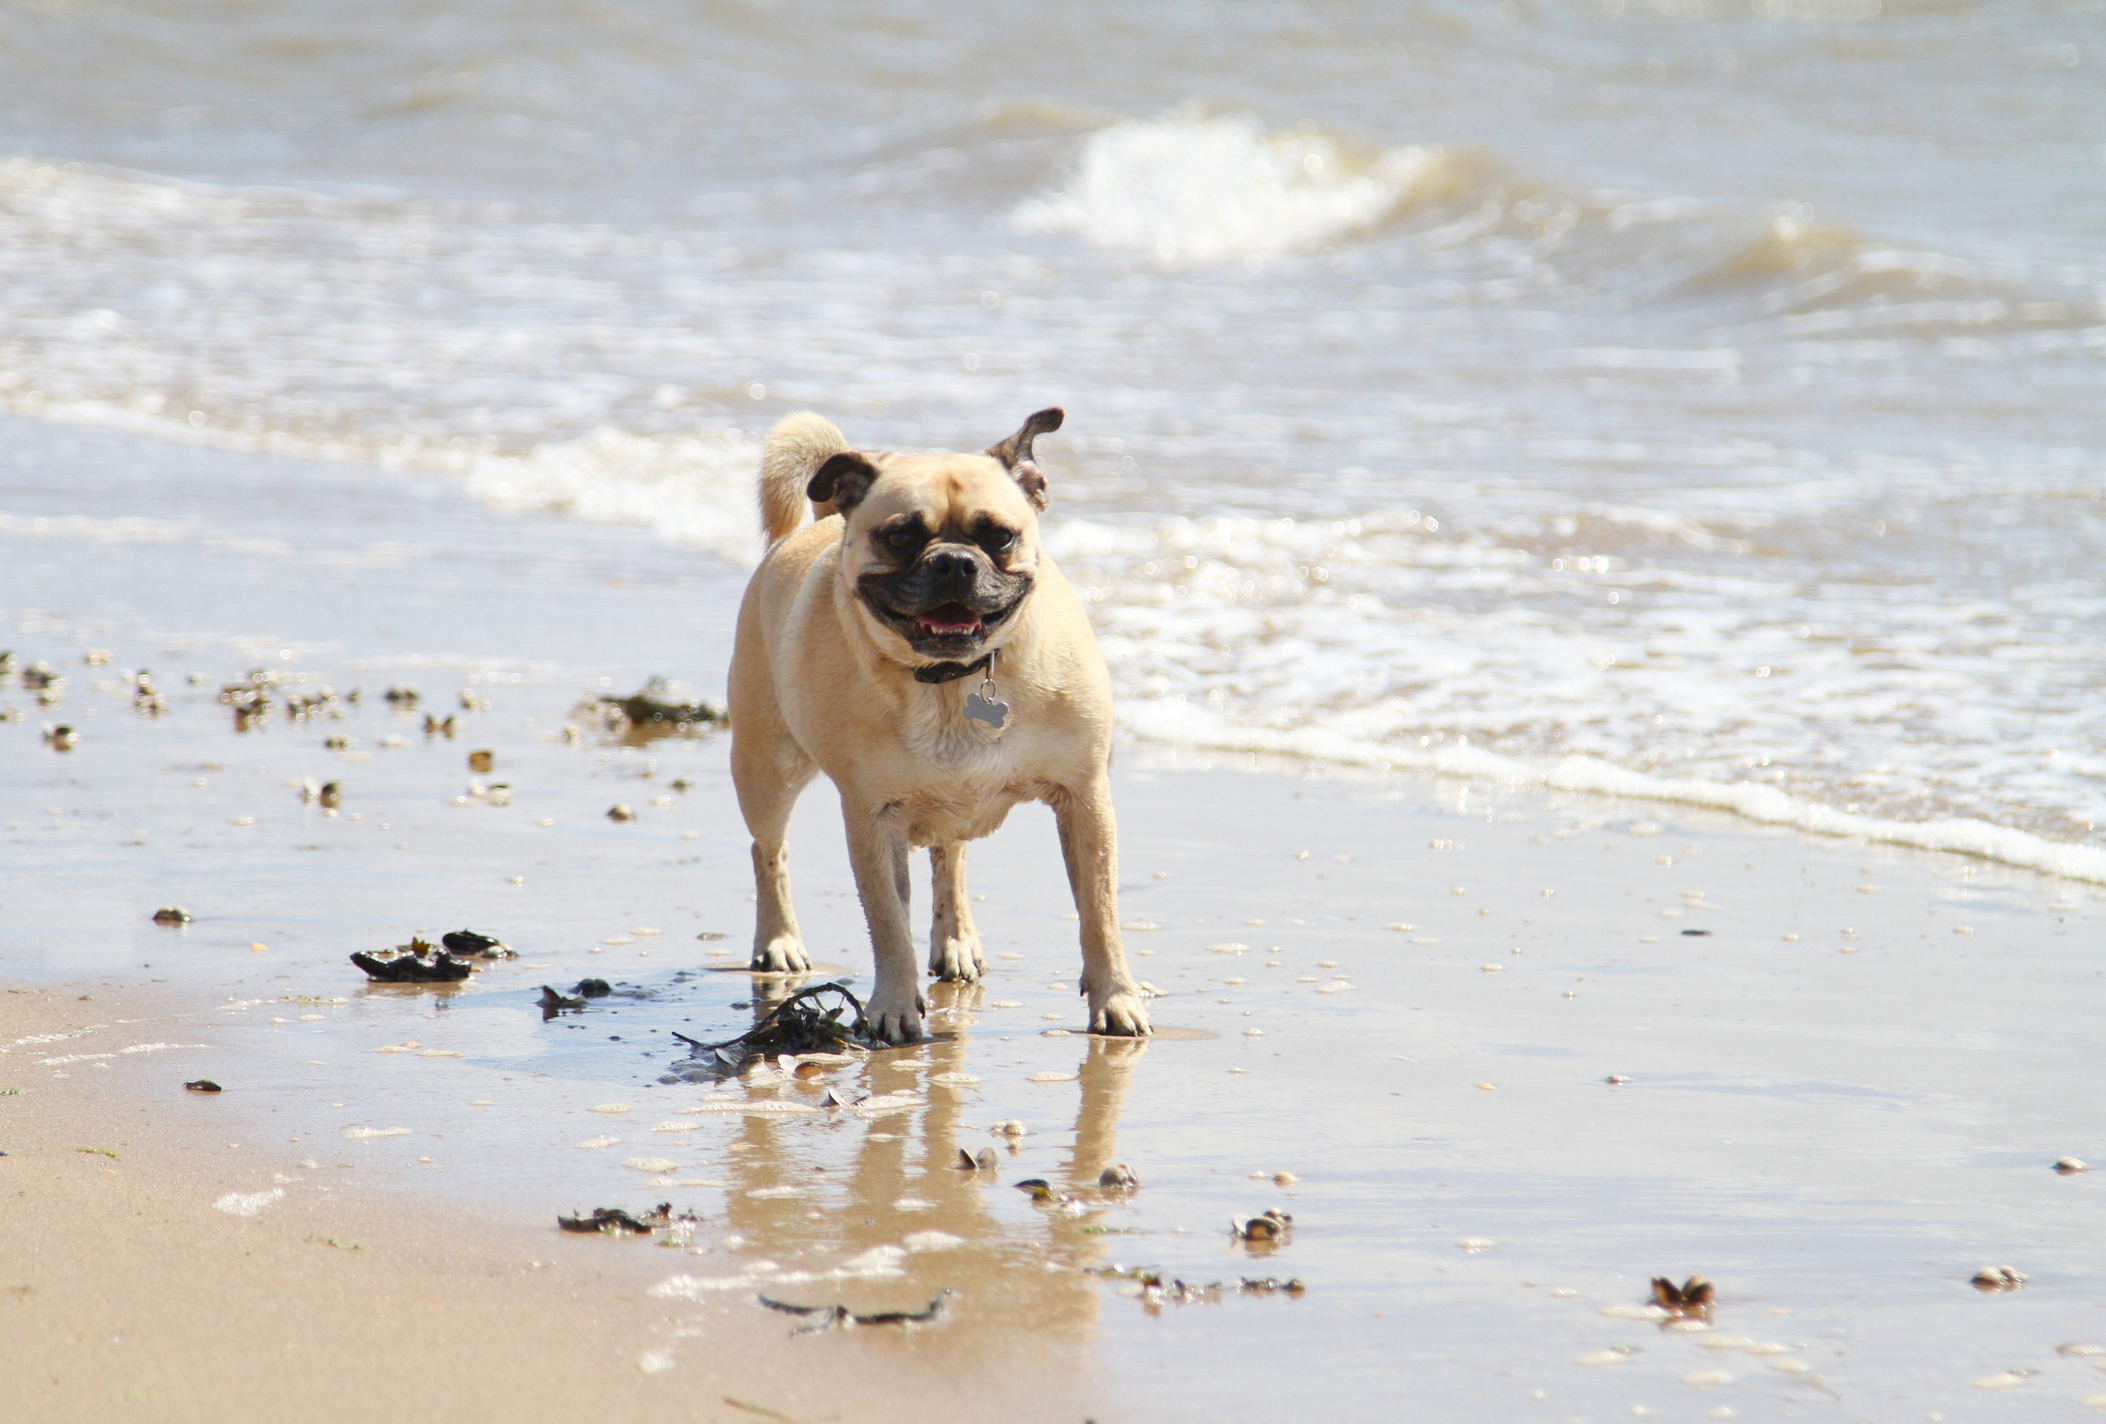 Jug or Jack Russell Pug Mix Dog at the beach